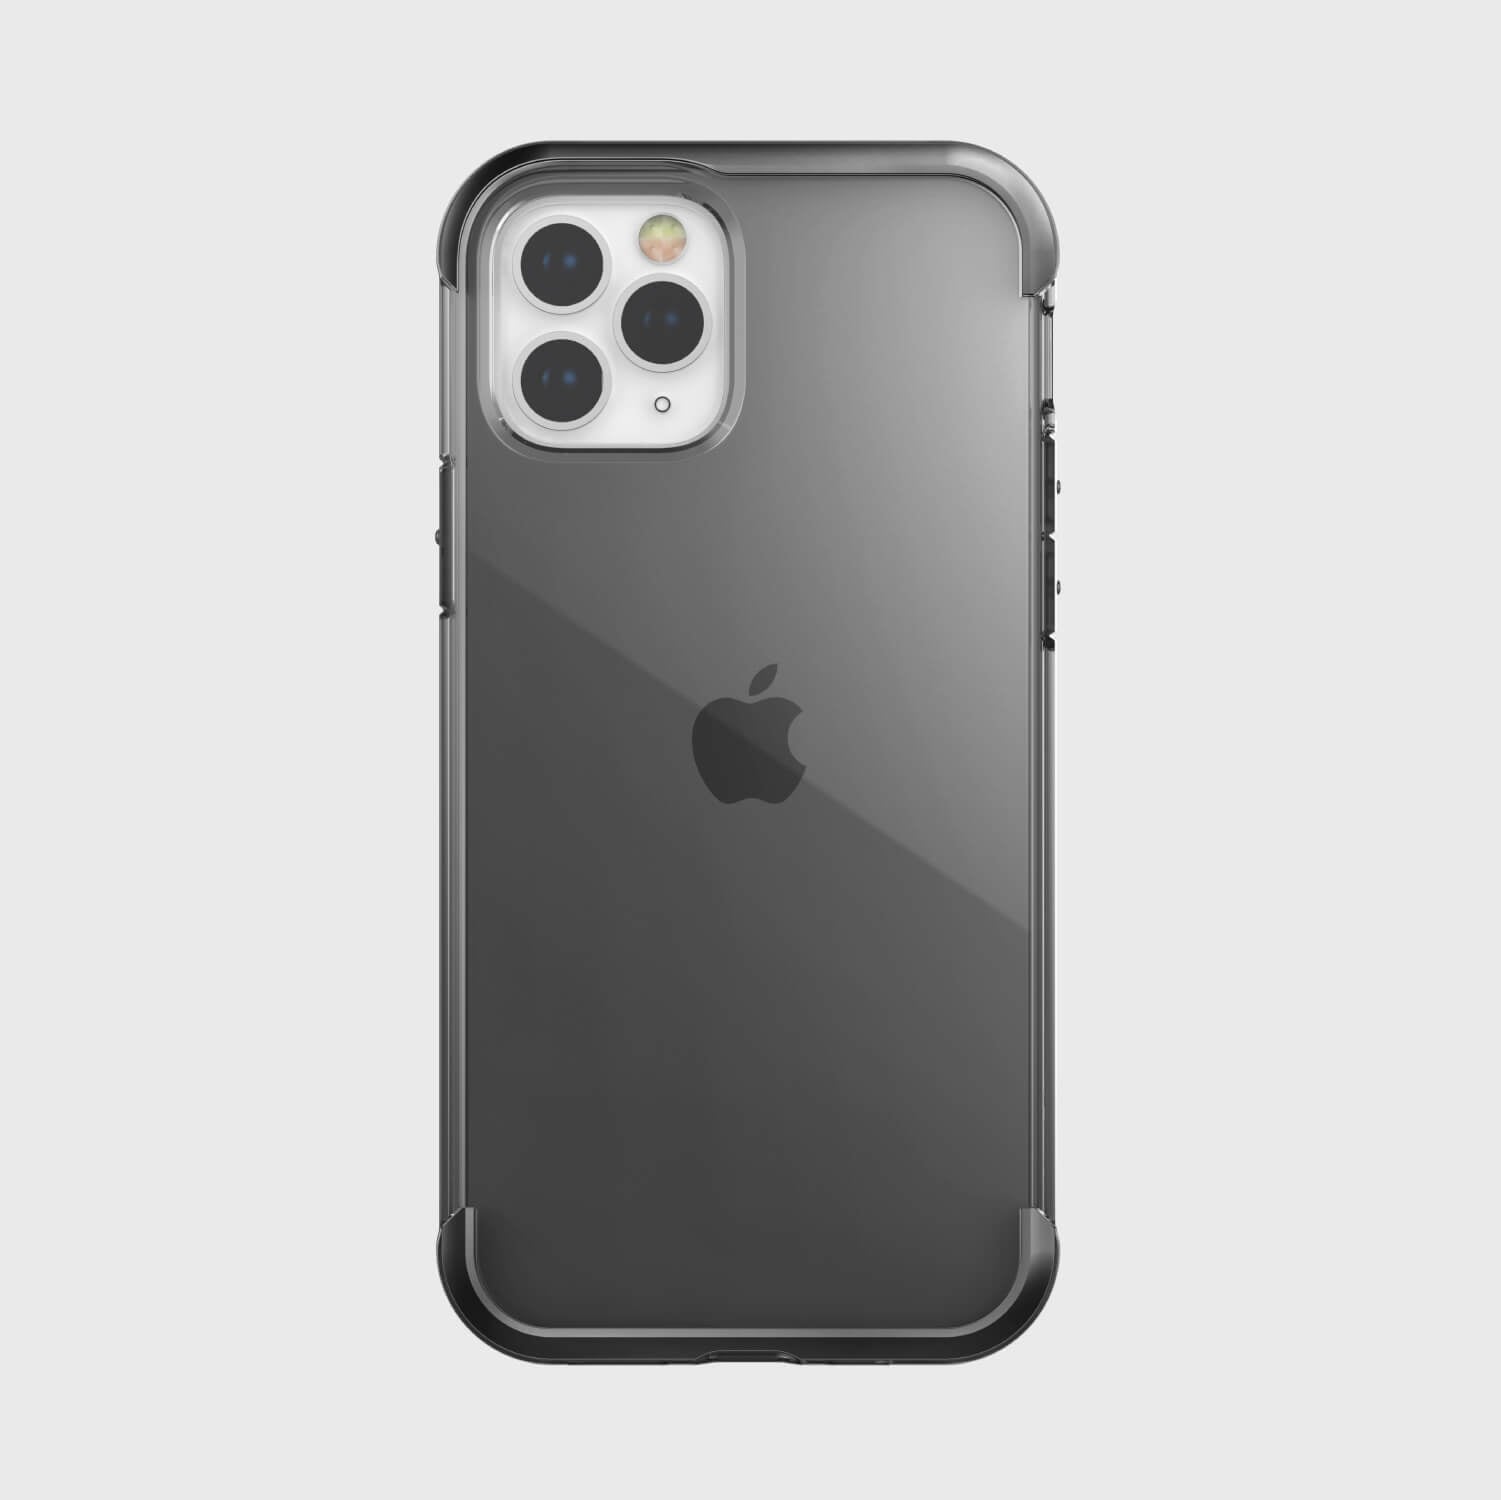 The black Raptic AIR iPhone 12 Pro Max case with wireless charging compatibility.